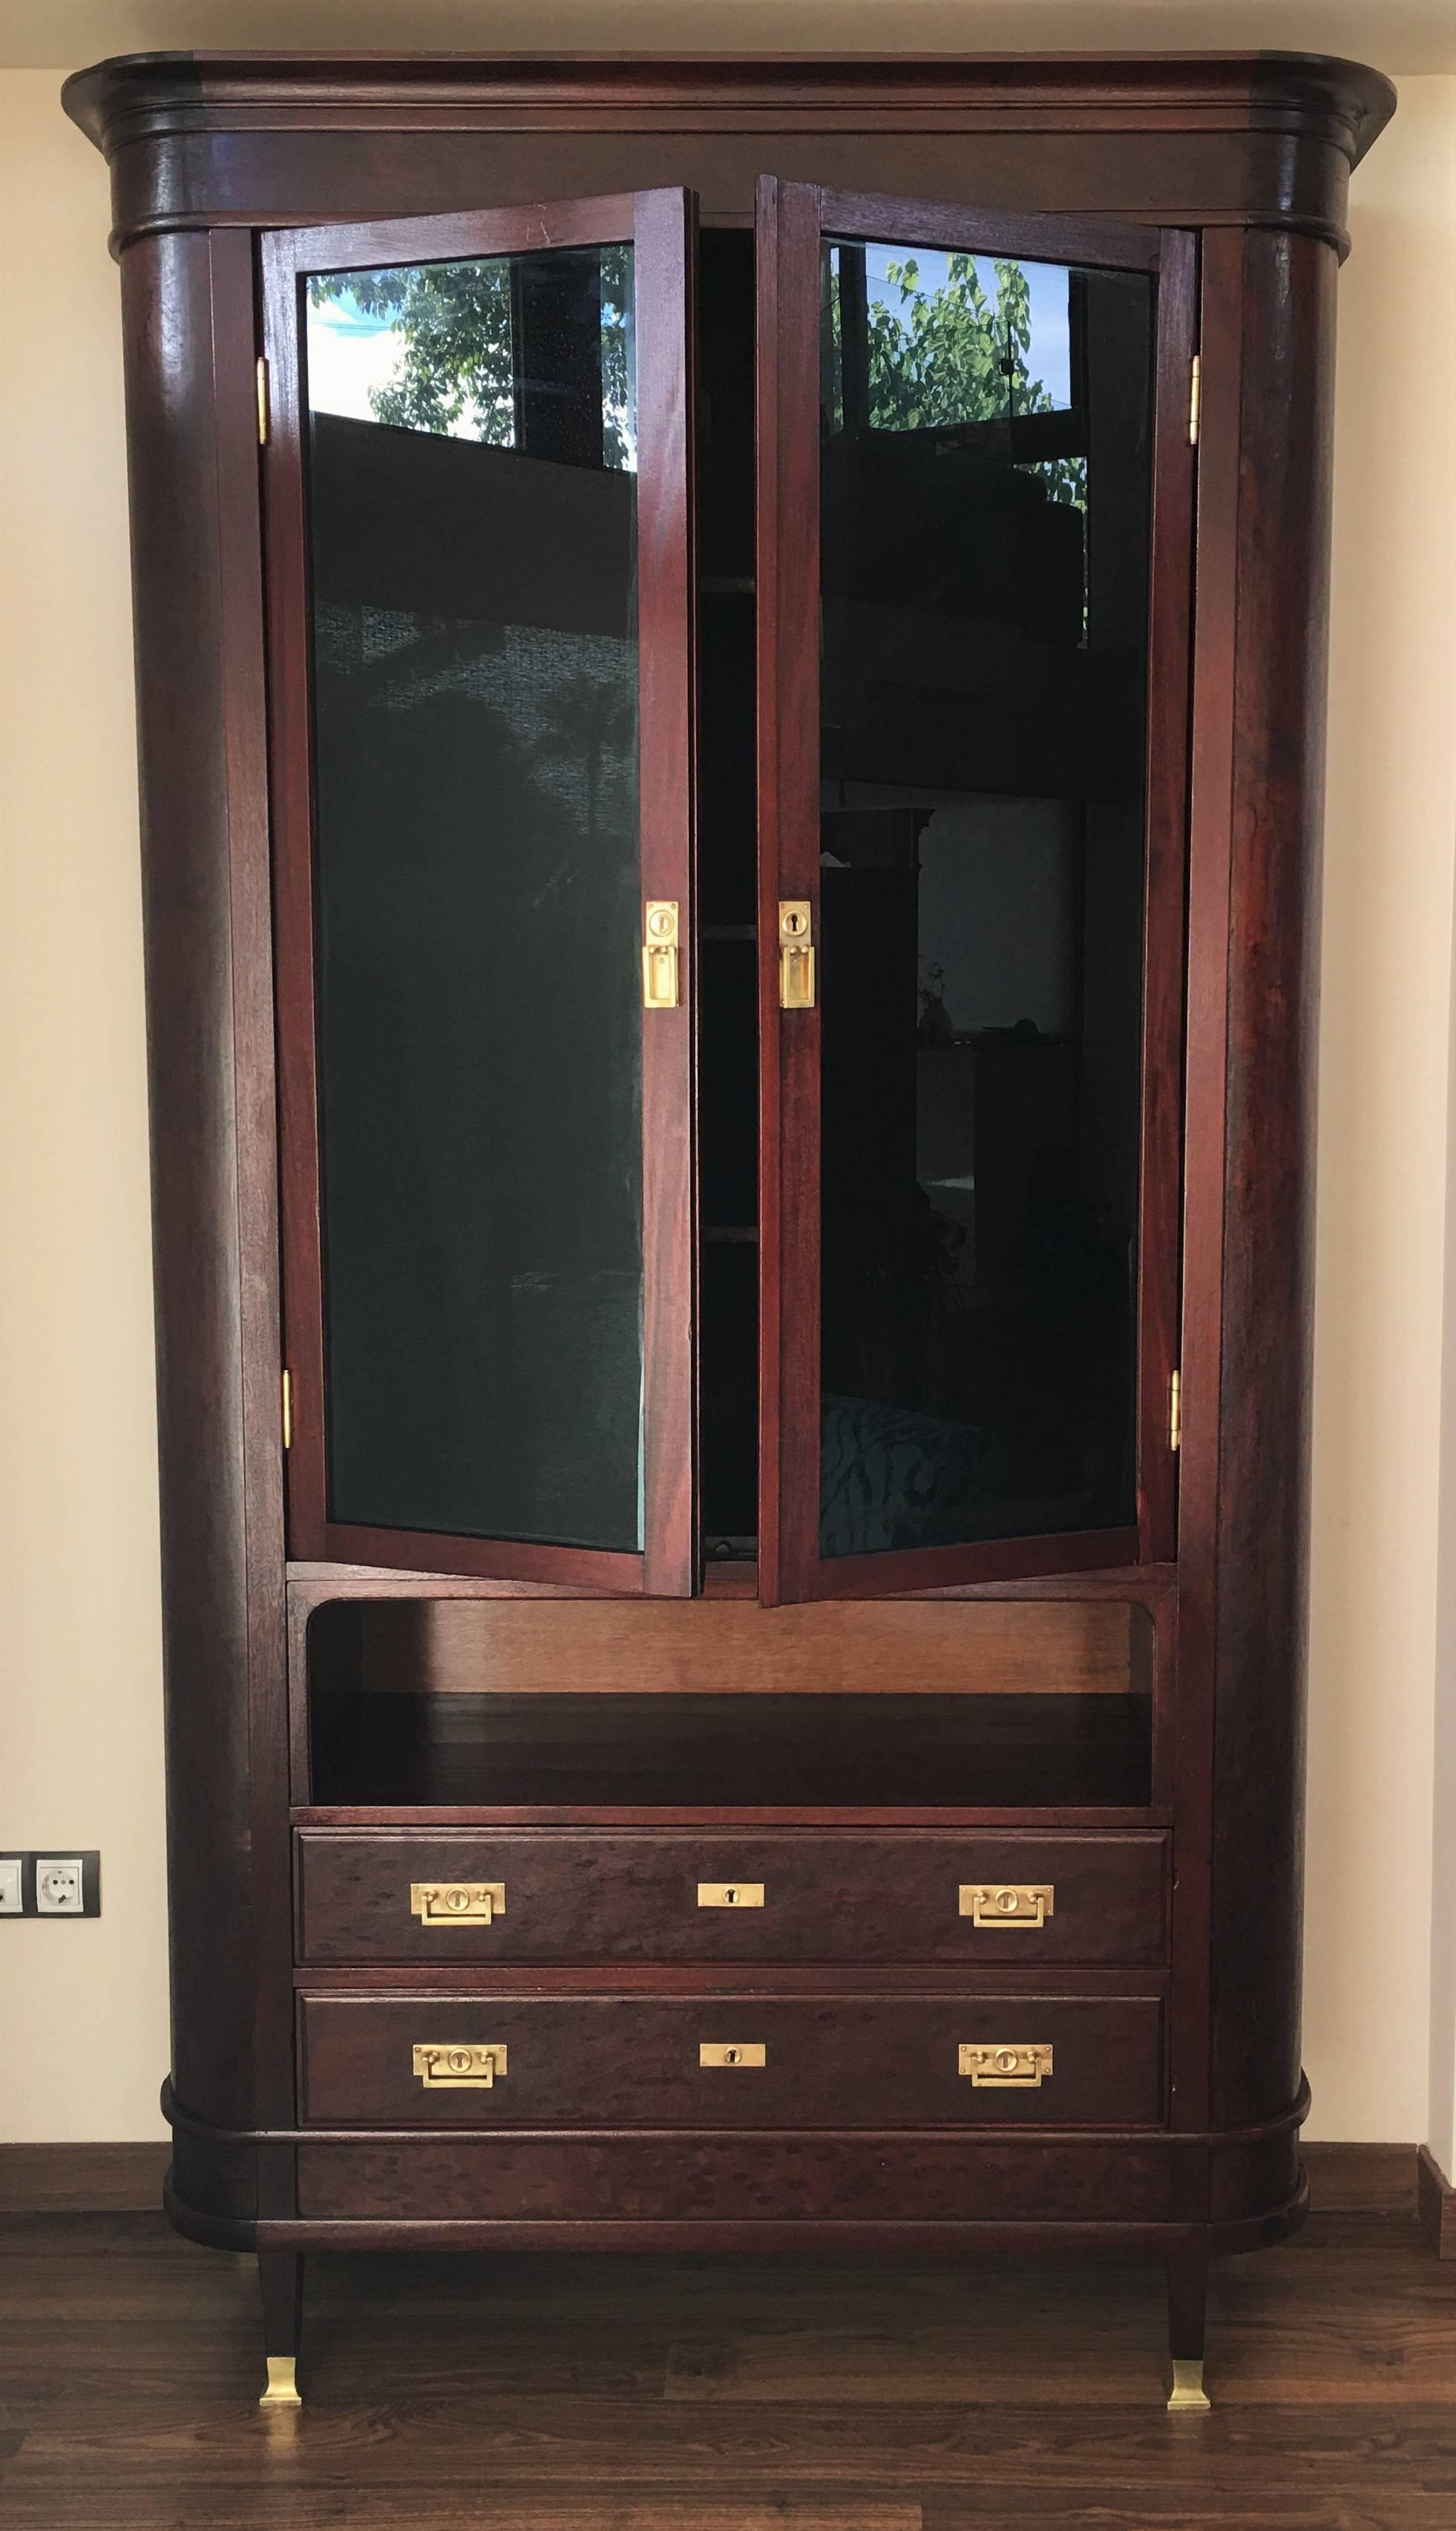 Mahogany Showcase Vitrine Art Decó with two drawers

Impressive mahogany bookcase from the 1920s. Upper section has two black glass-front doors with three shelves, perfect for housing and showcasing your books or collectables. Lower section has two